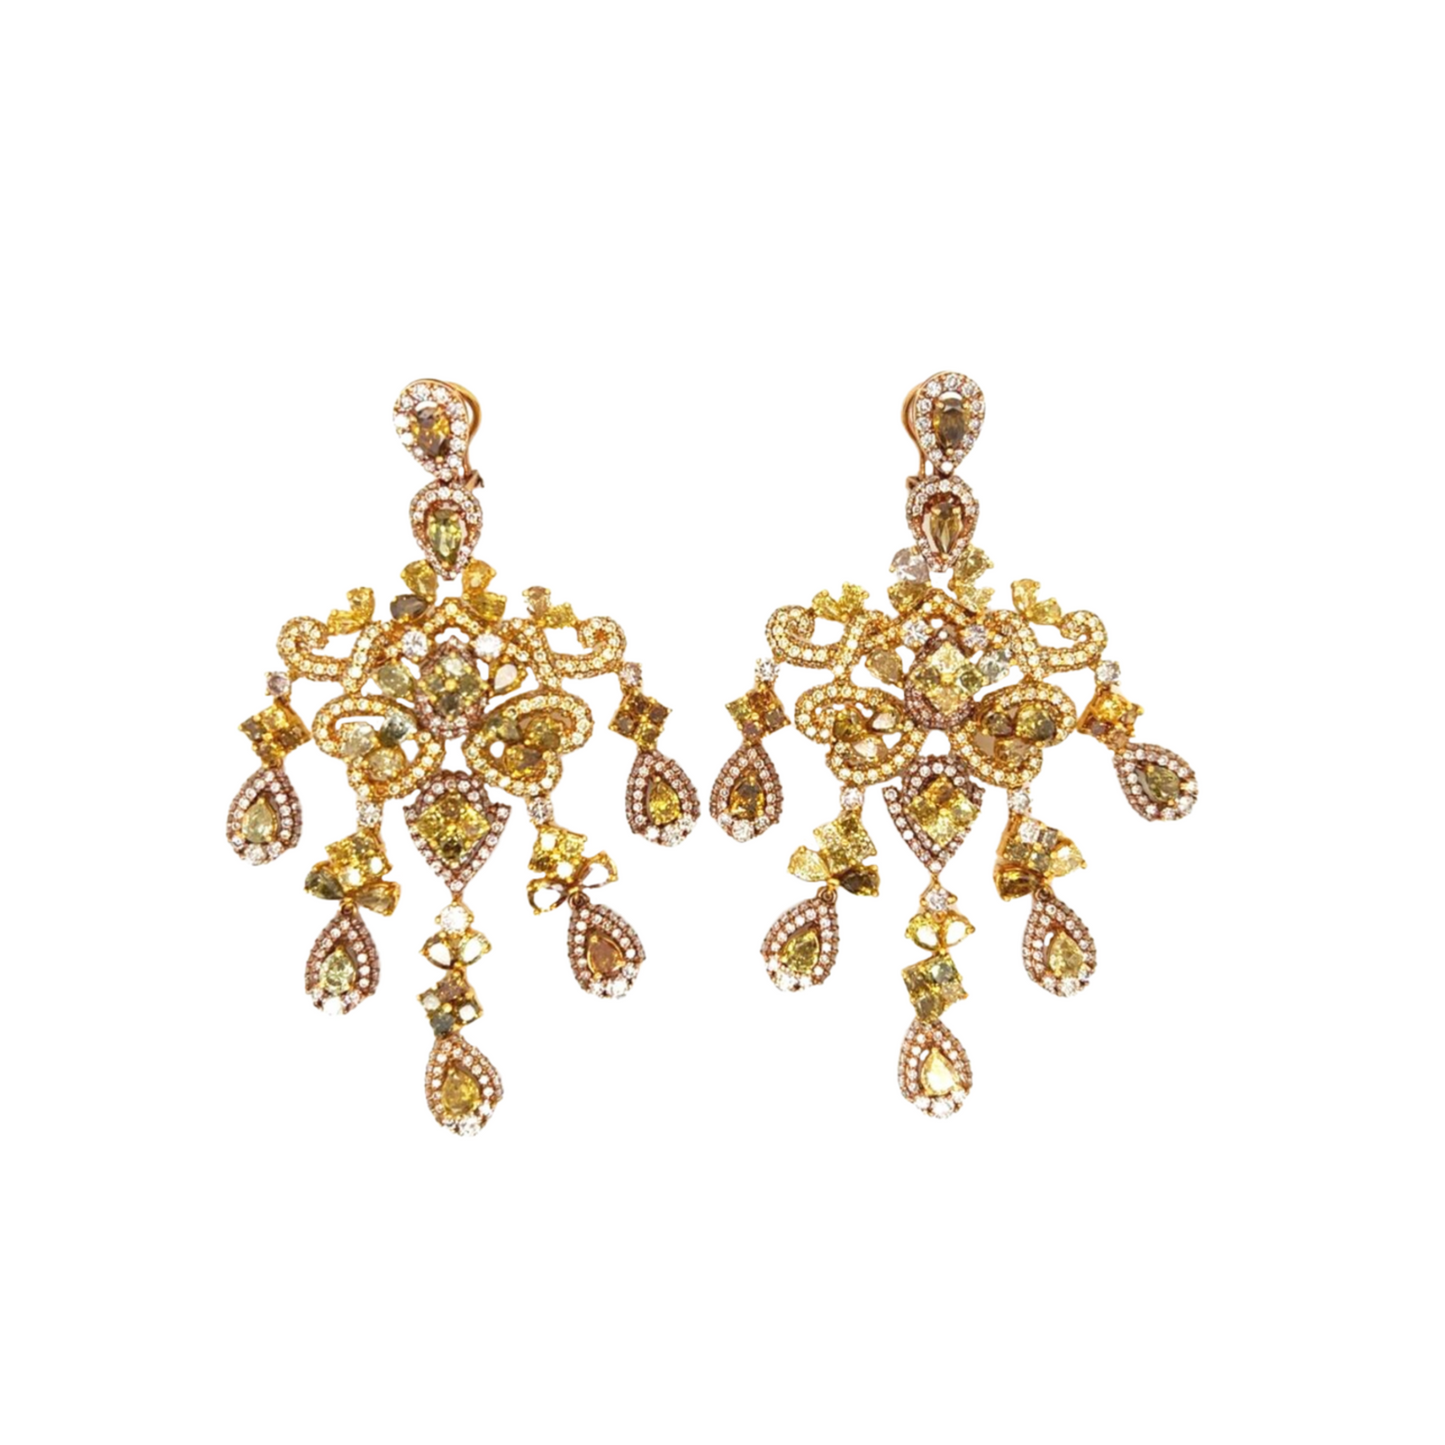 Post-1980s 18KT Yellow Gold Natural Color Diamond Chandelier Earrings front view